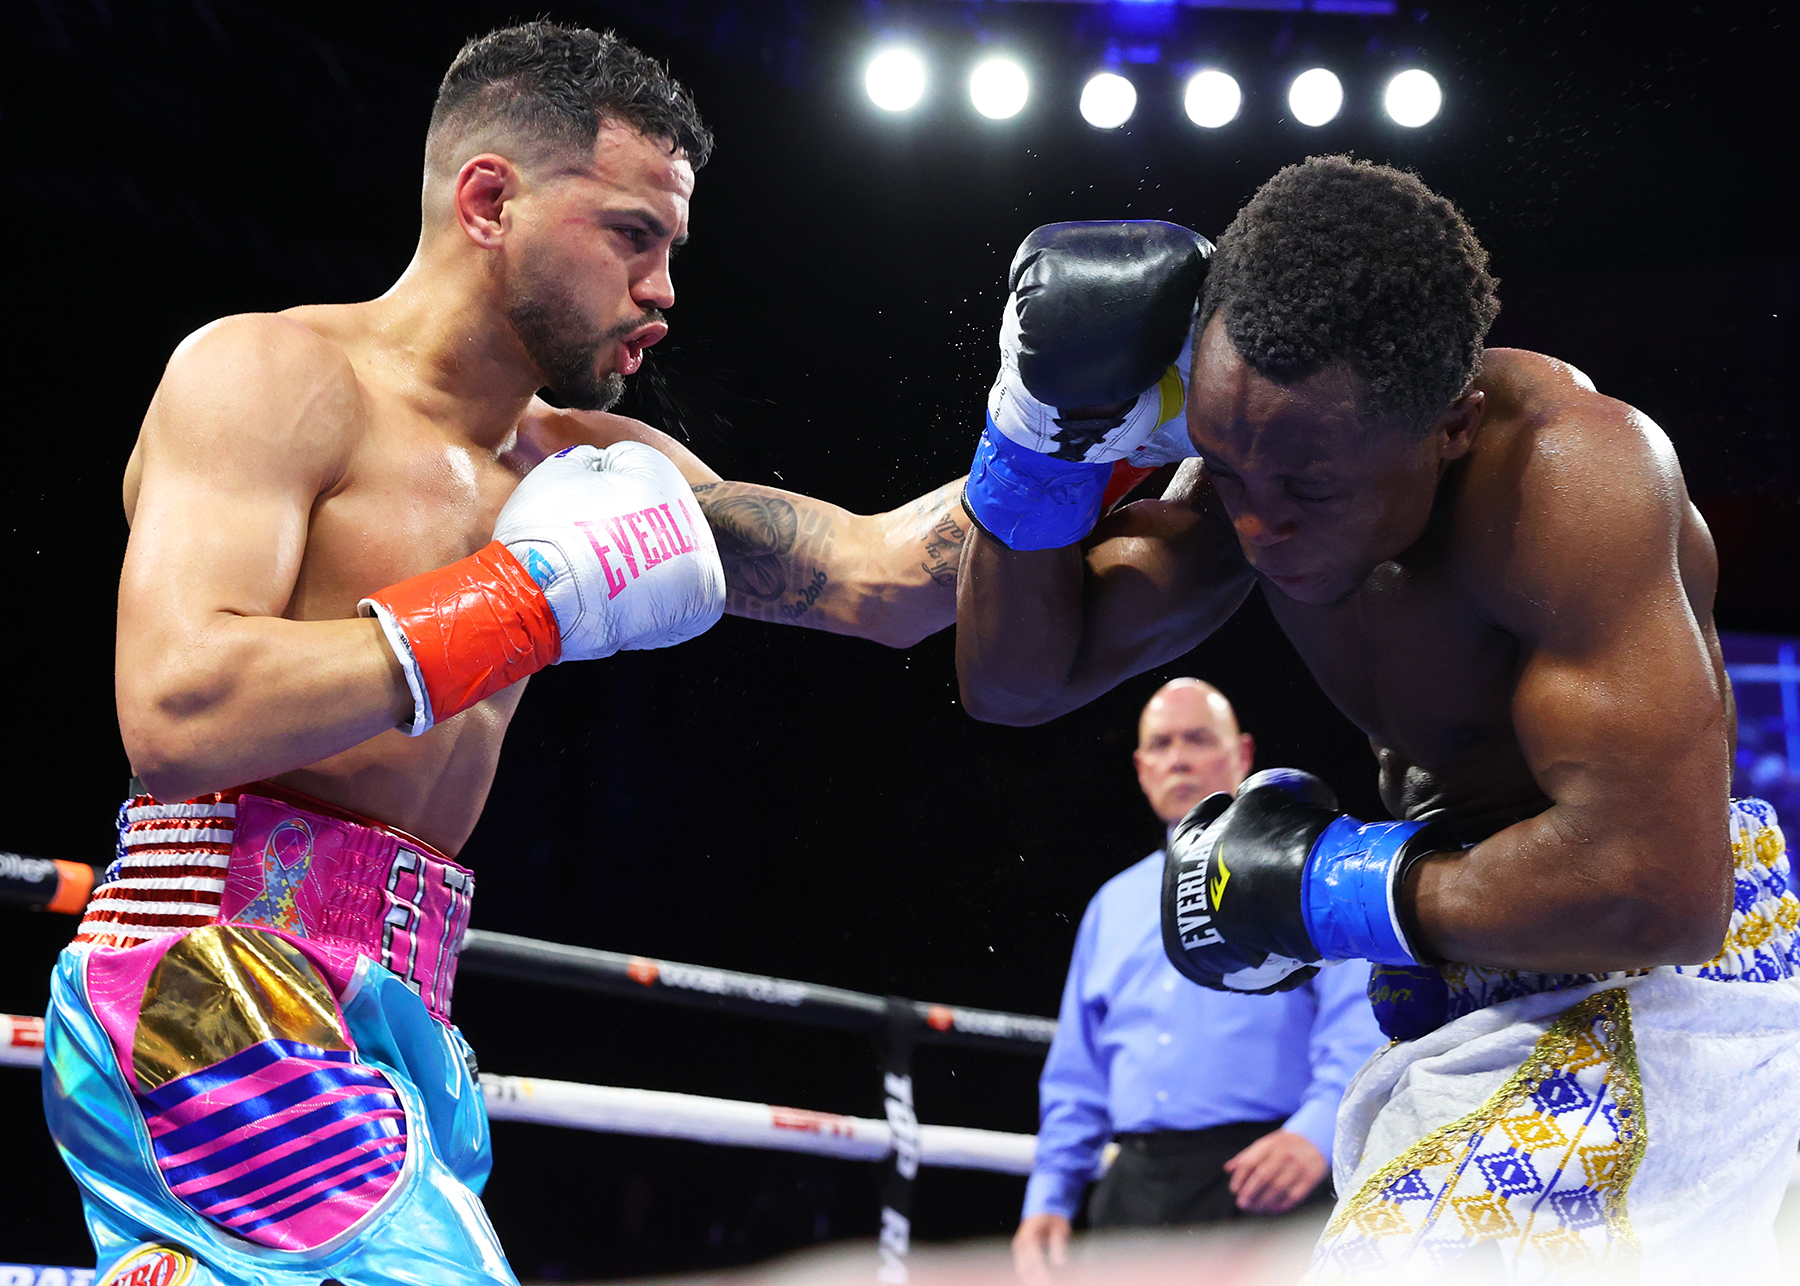 Robeisy Ramirez (left) en route to defeating Isaac Dogboe for the vacant WBO featherweight title. (Photo by Mikey Williams/Top Rank Inc via Getty Images)